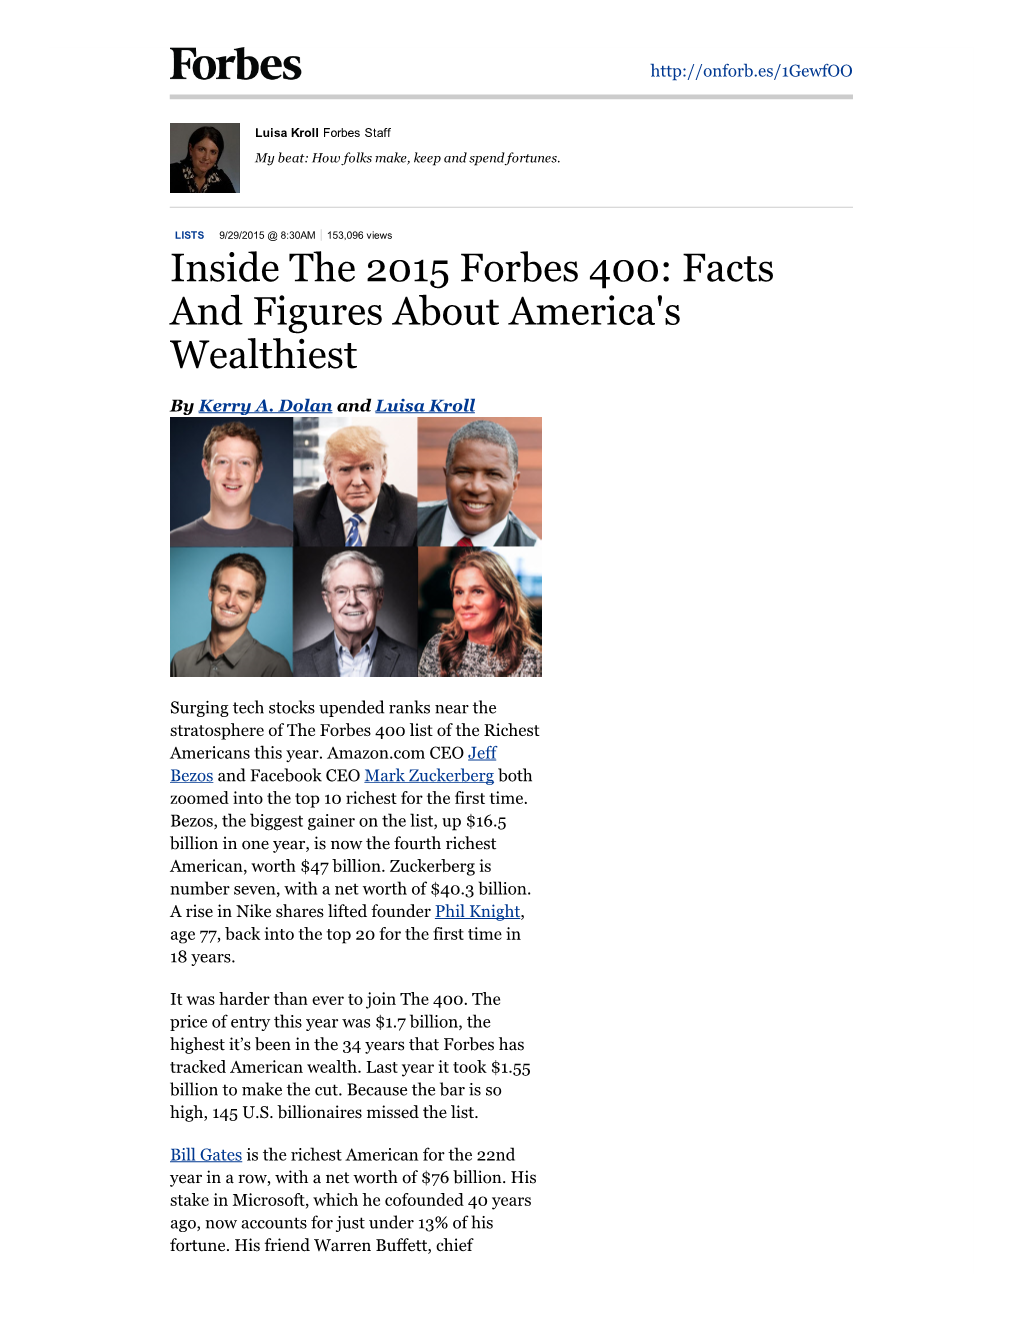 Inside the 2015 Forbes 400: Facts and Figures About America's Wealthiest